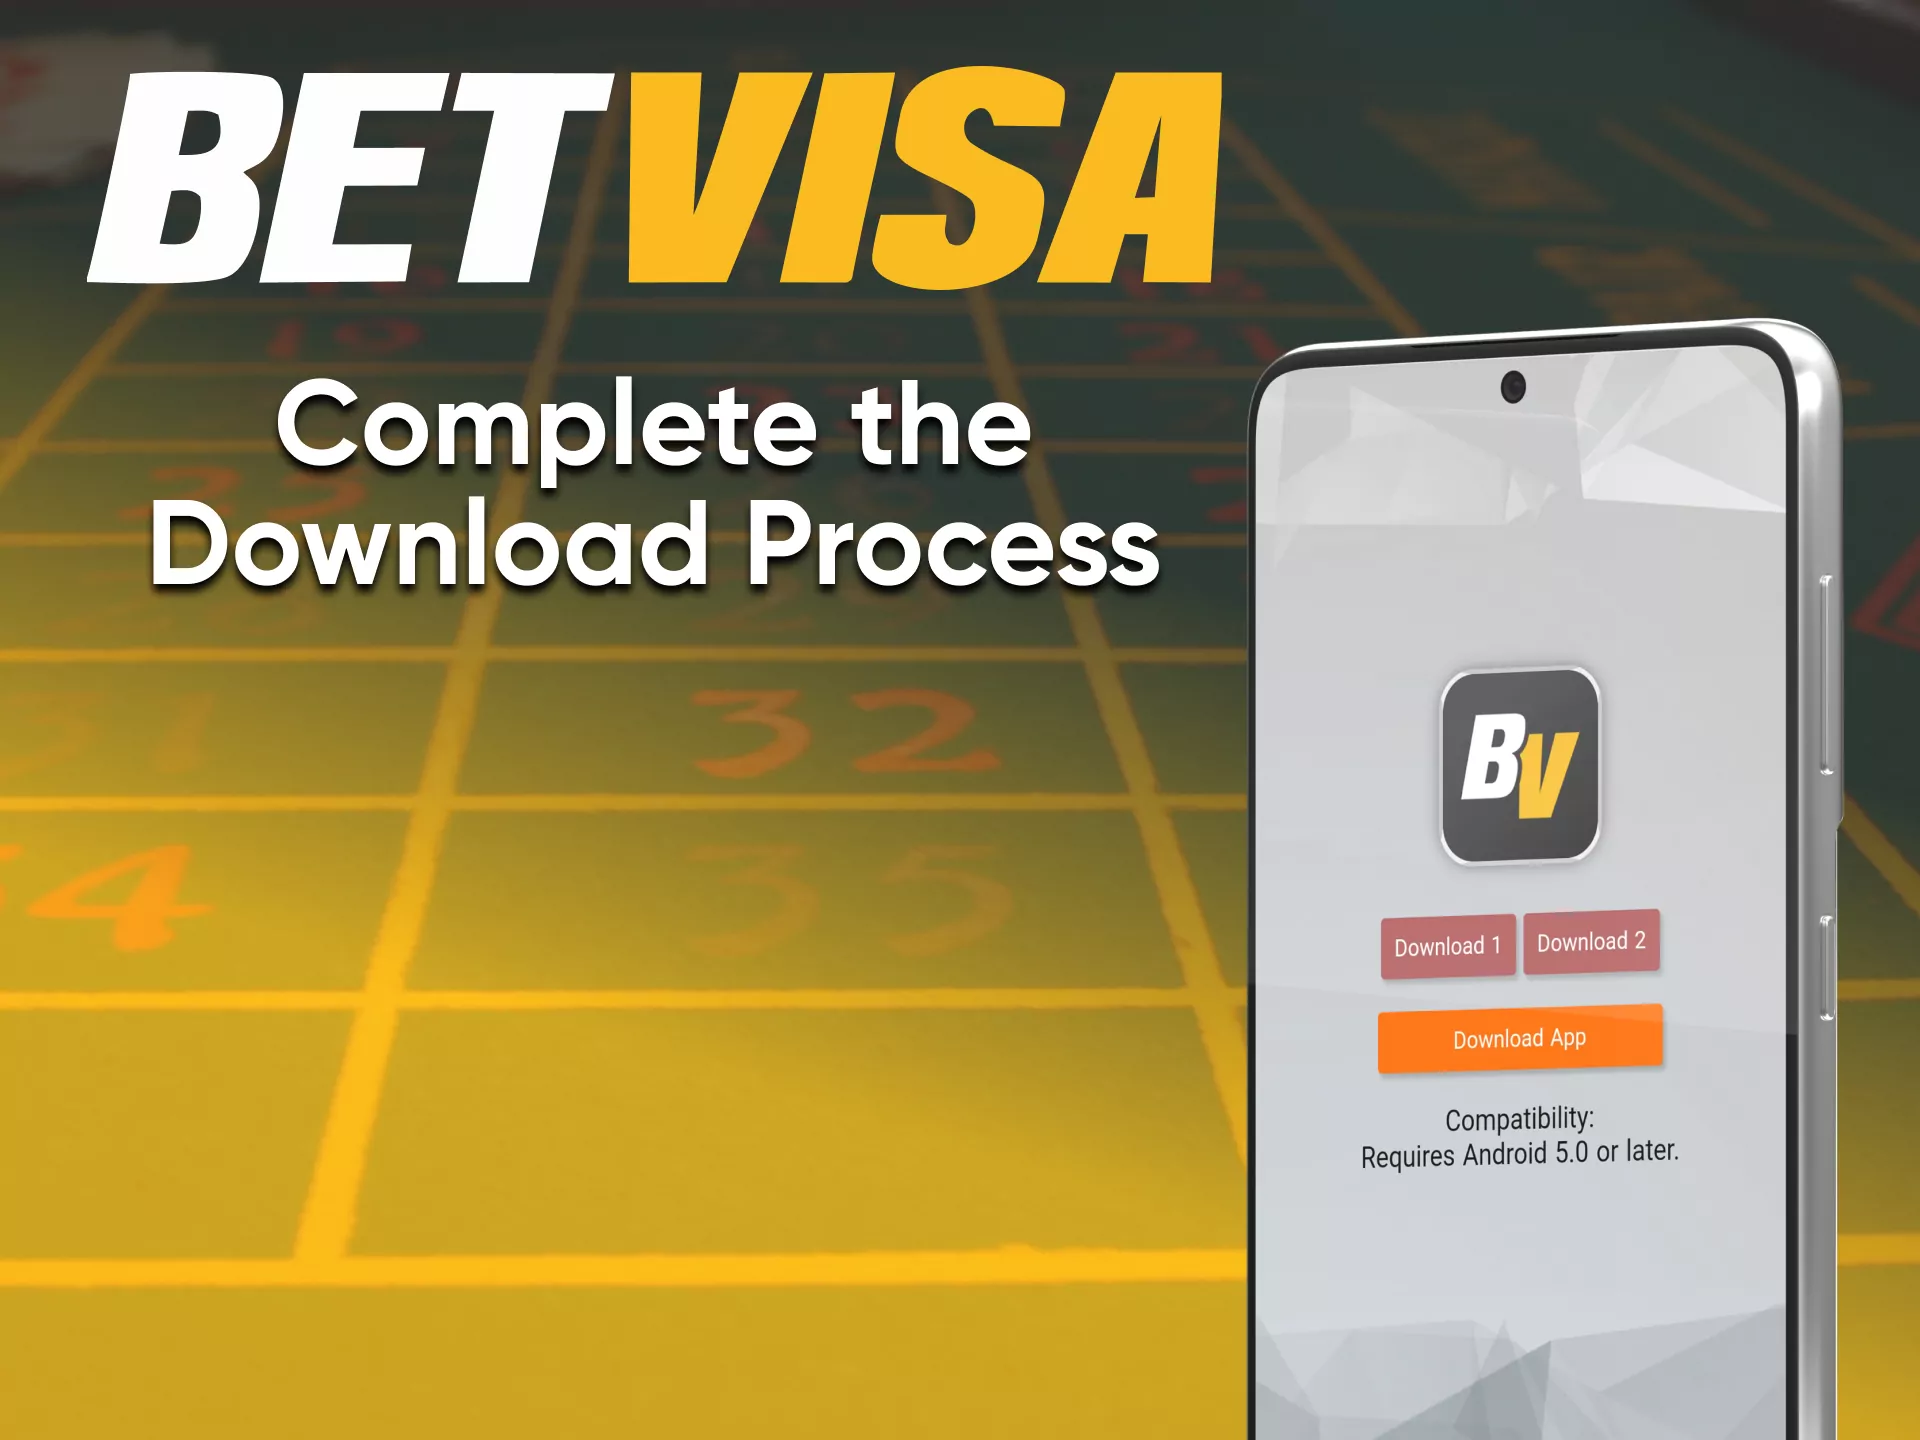 Install the application on your device from BetVisa.